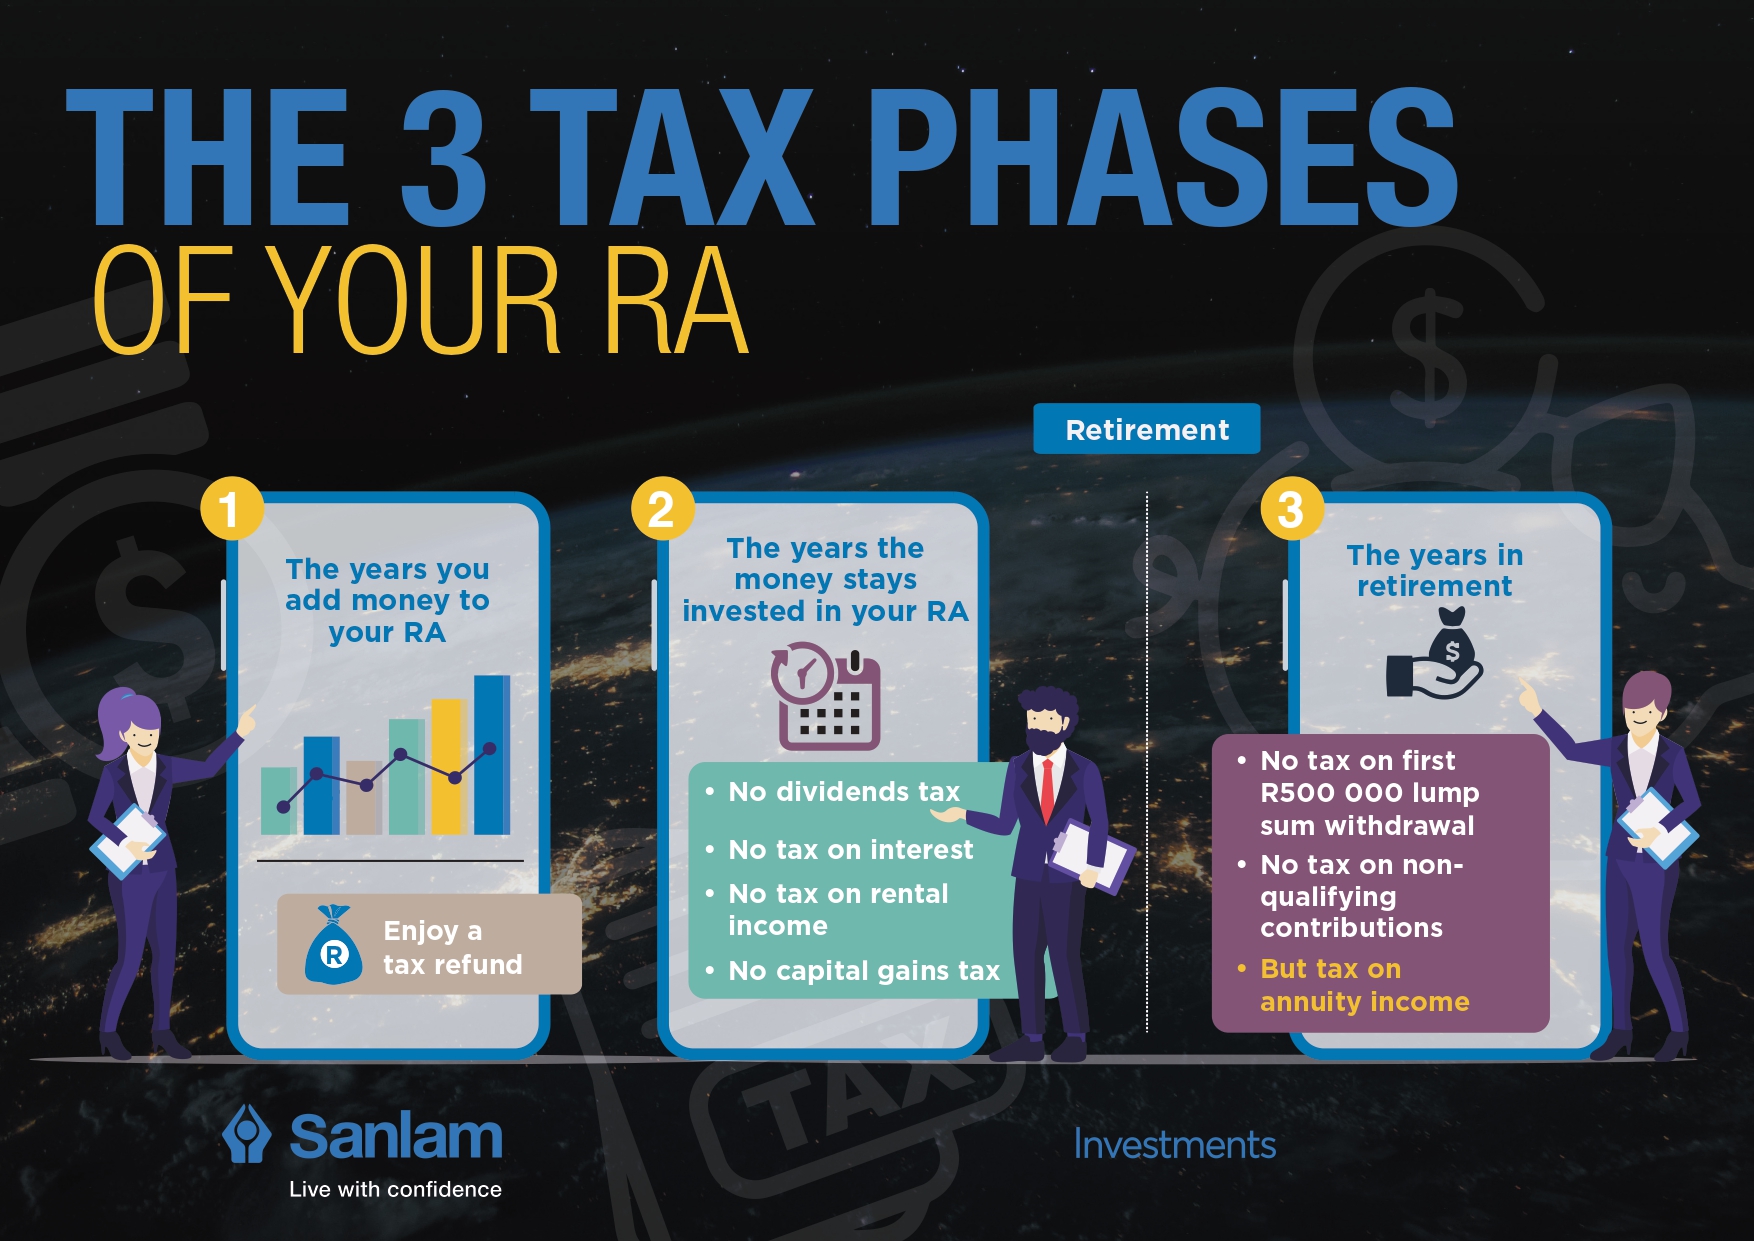 Tax phases of your RA